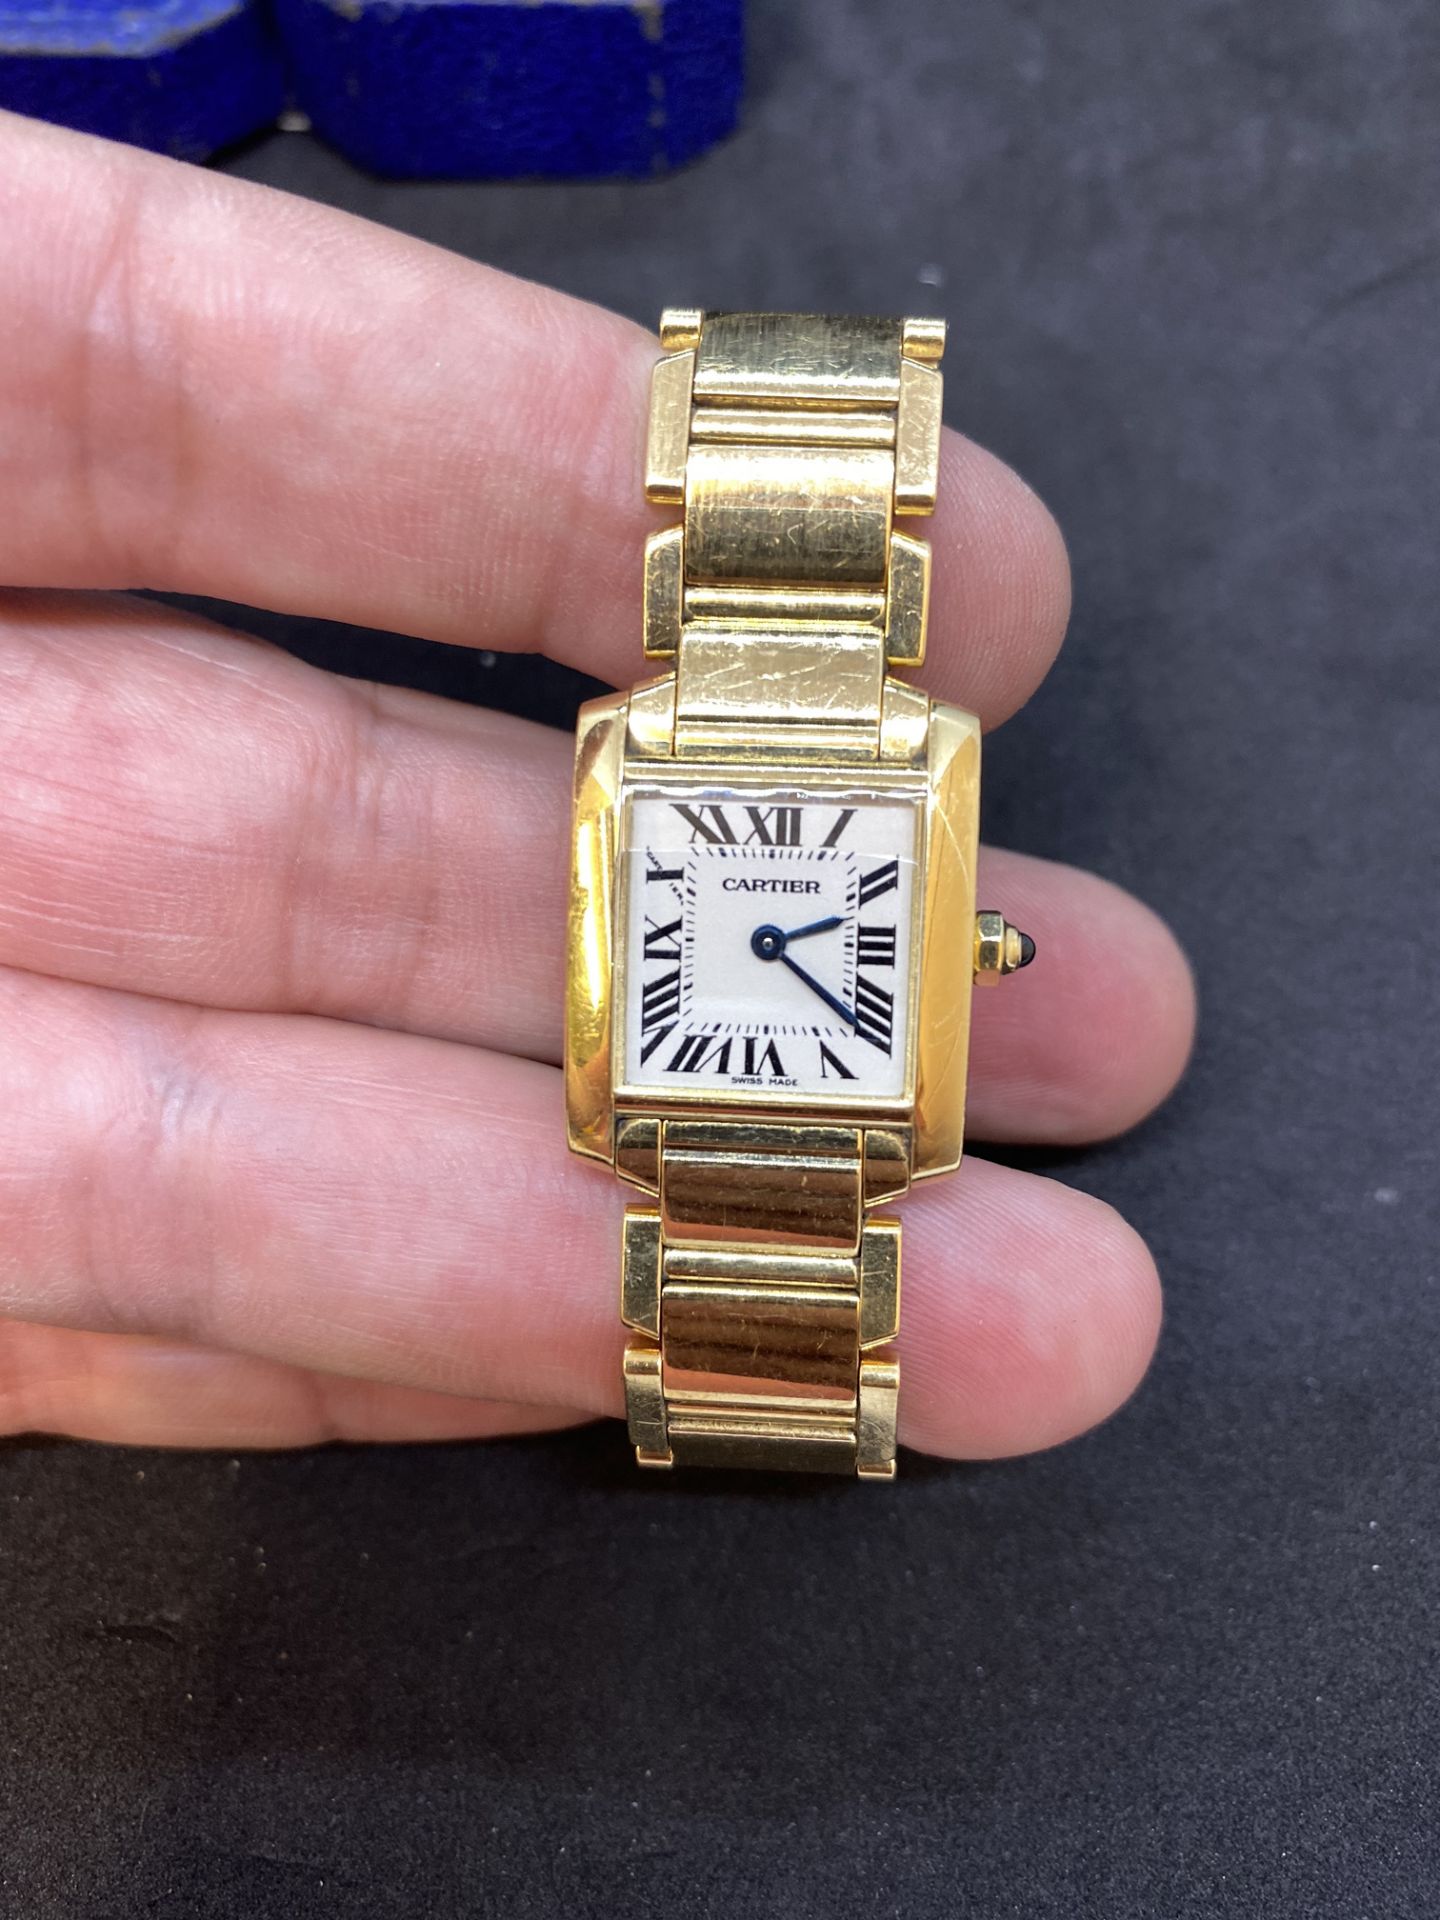 18ct GOLD CARTIER TANK FRANCAISE LADIES WATCH 2385 - Image 6 of 9